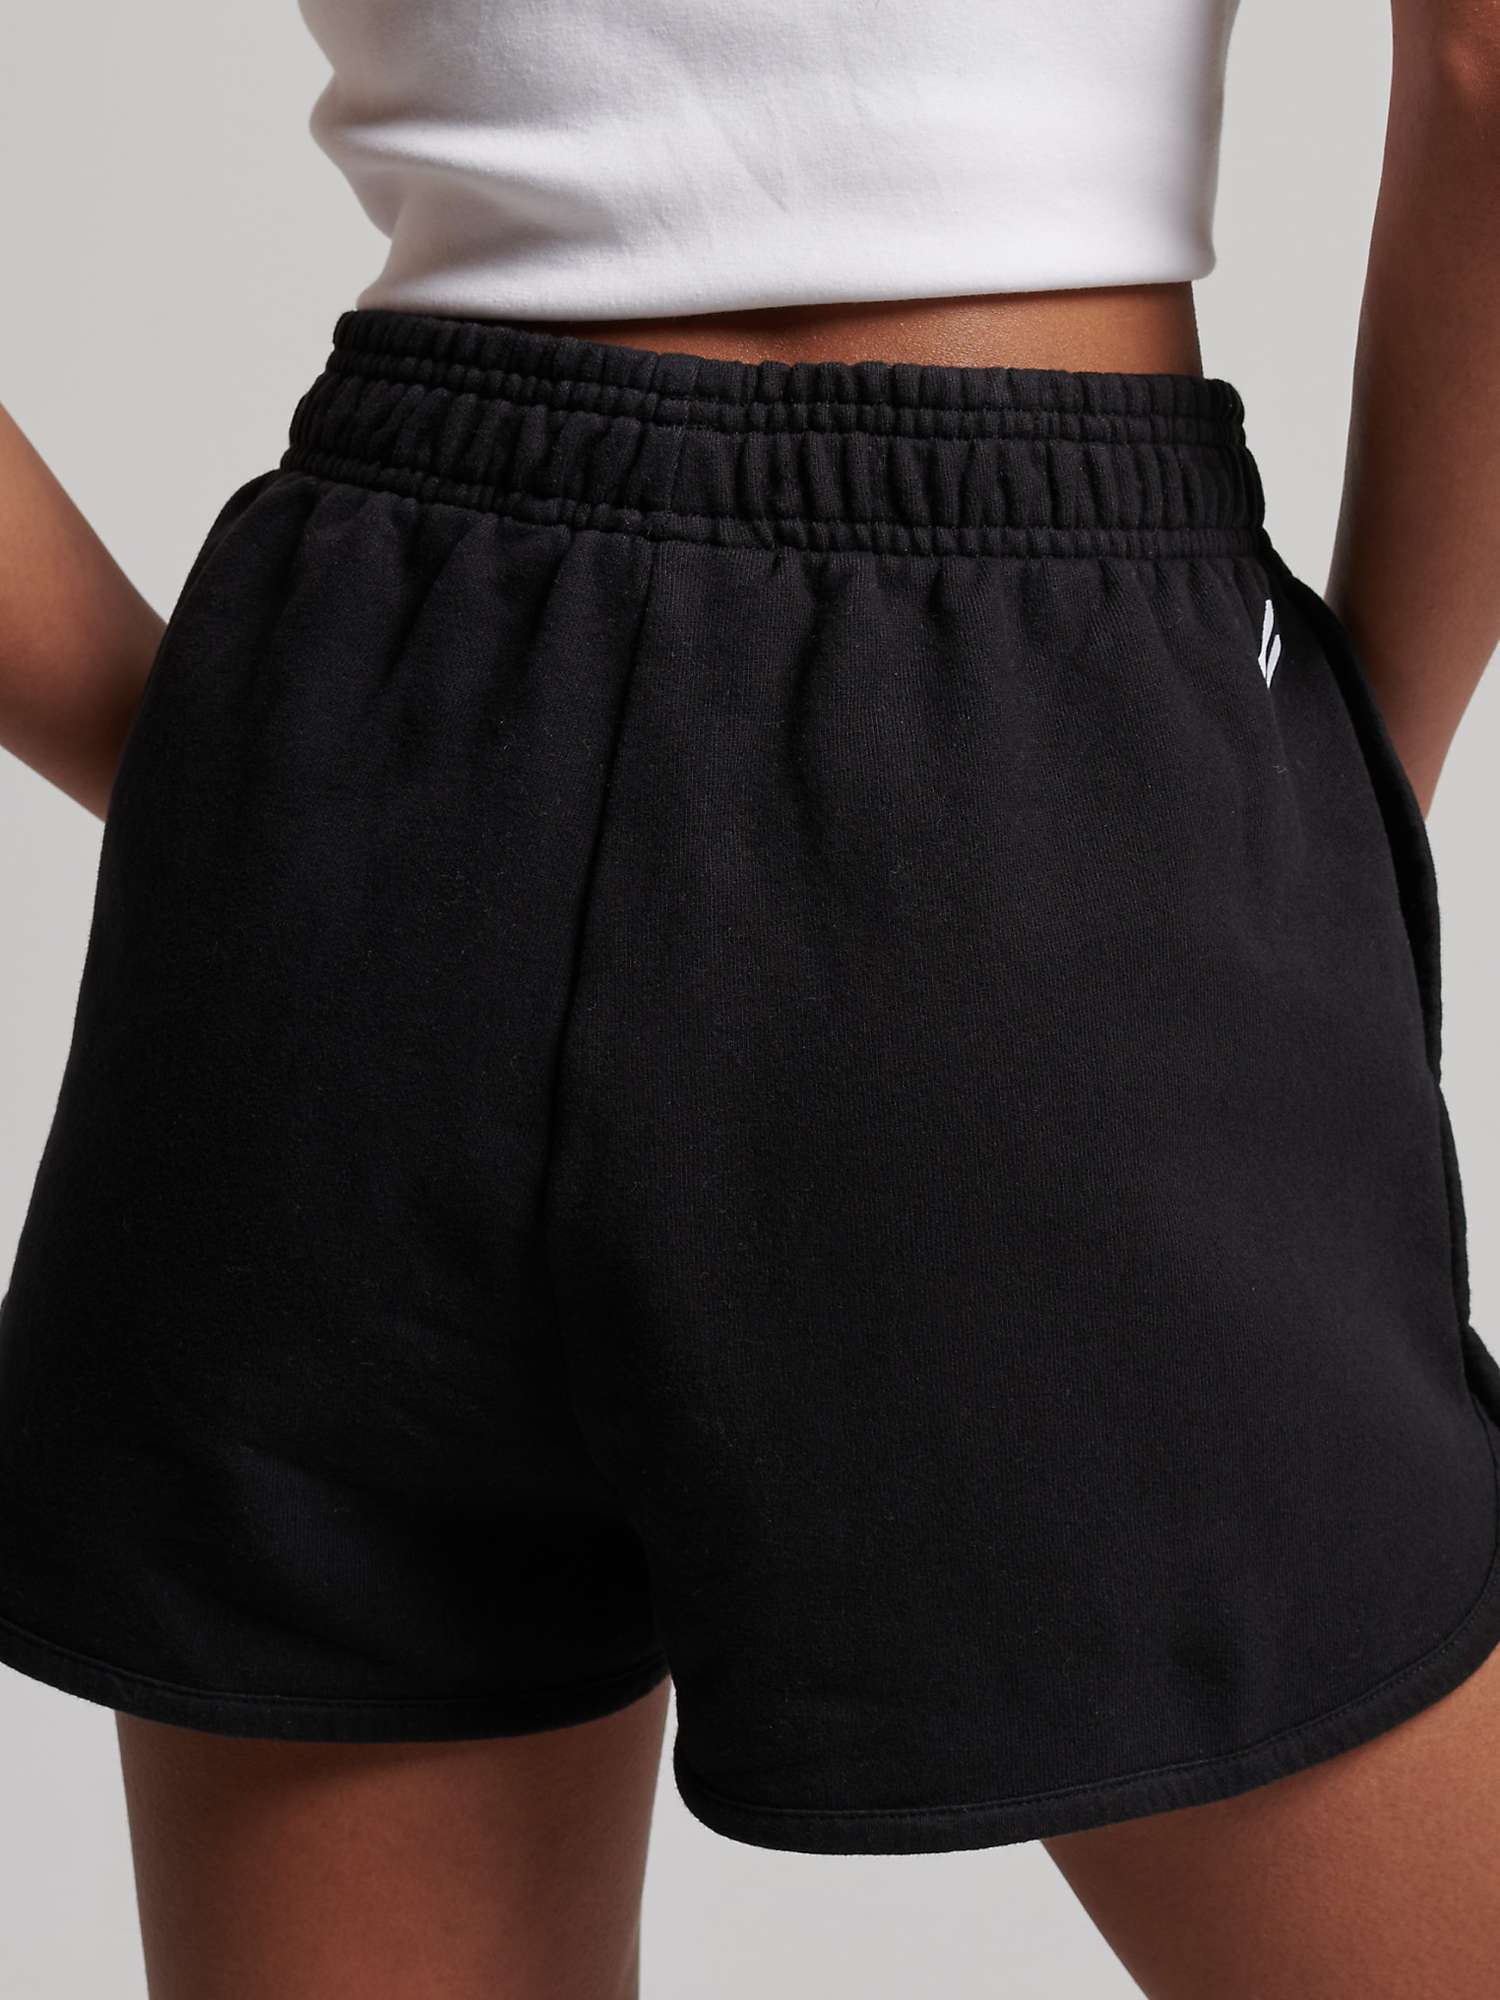 Buy Superdry Core Sport Sweat Shorts Online at johnlewis.com